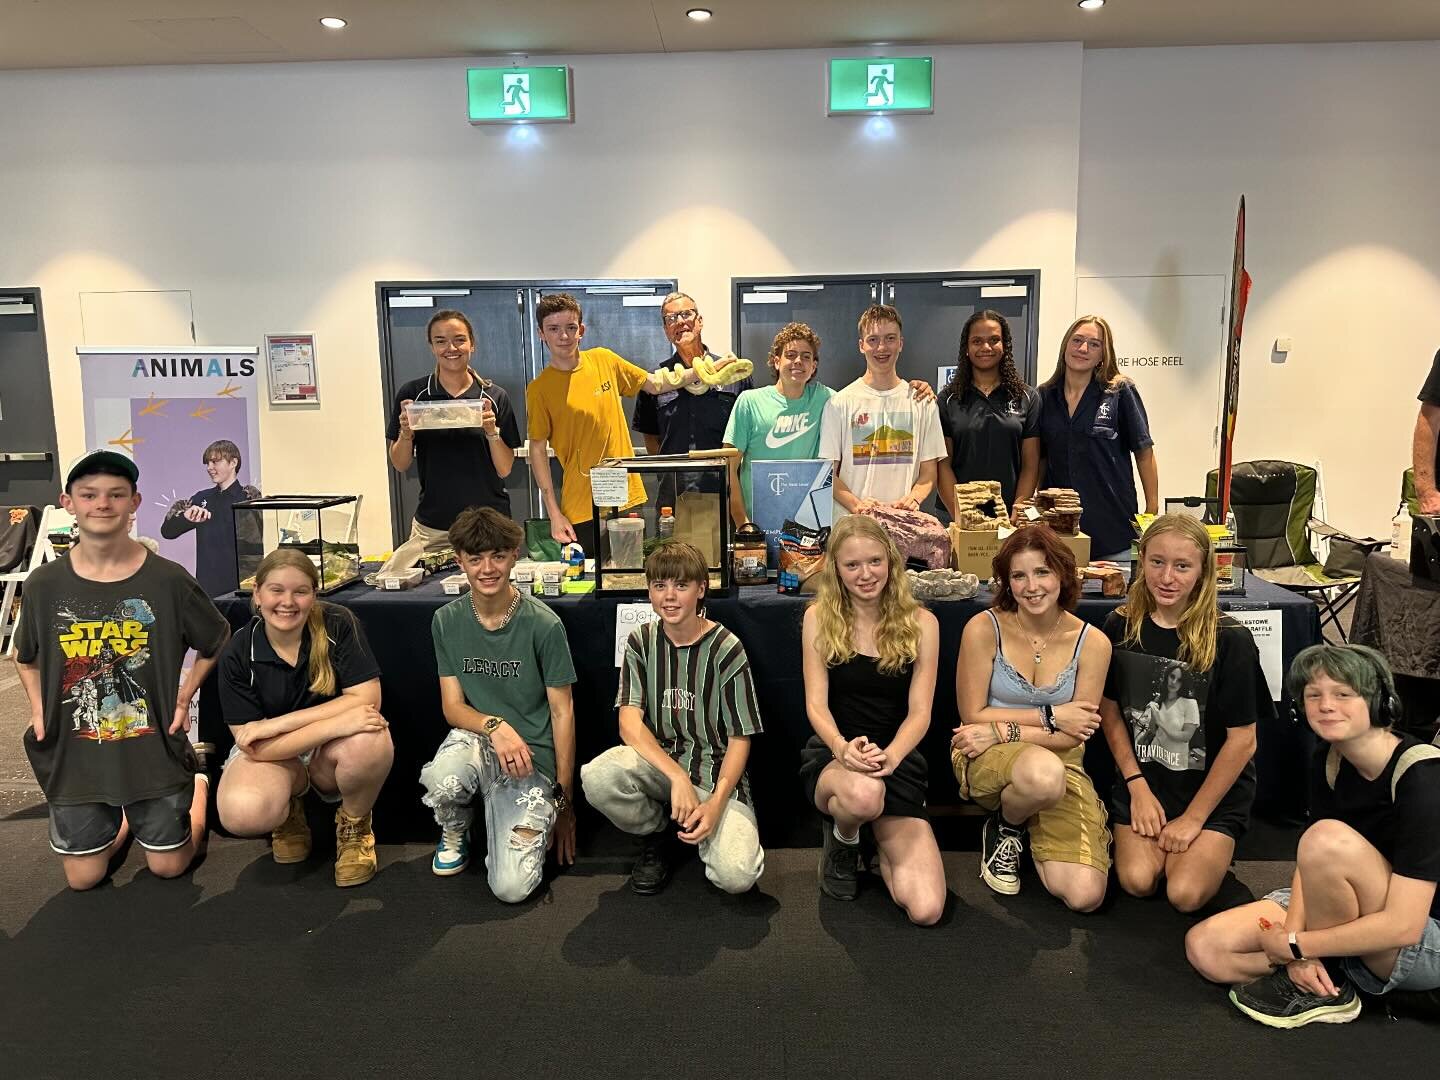 An awesome TC turnout at the @victorian_herp_society  Reptile and Amphibian Expo this weekend! We had a strong team of student and staff volunteers helping to run our table, and we saw lots of familiar faces at the event to explore and enjoy the day.